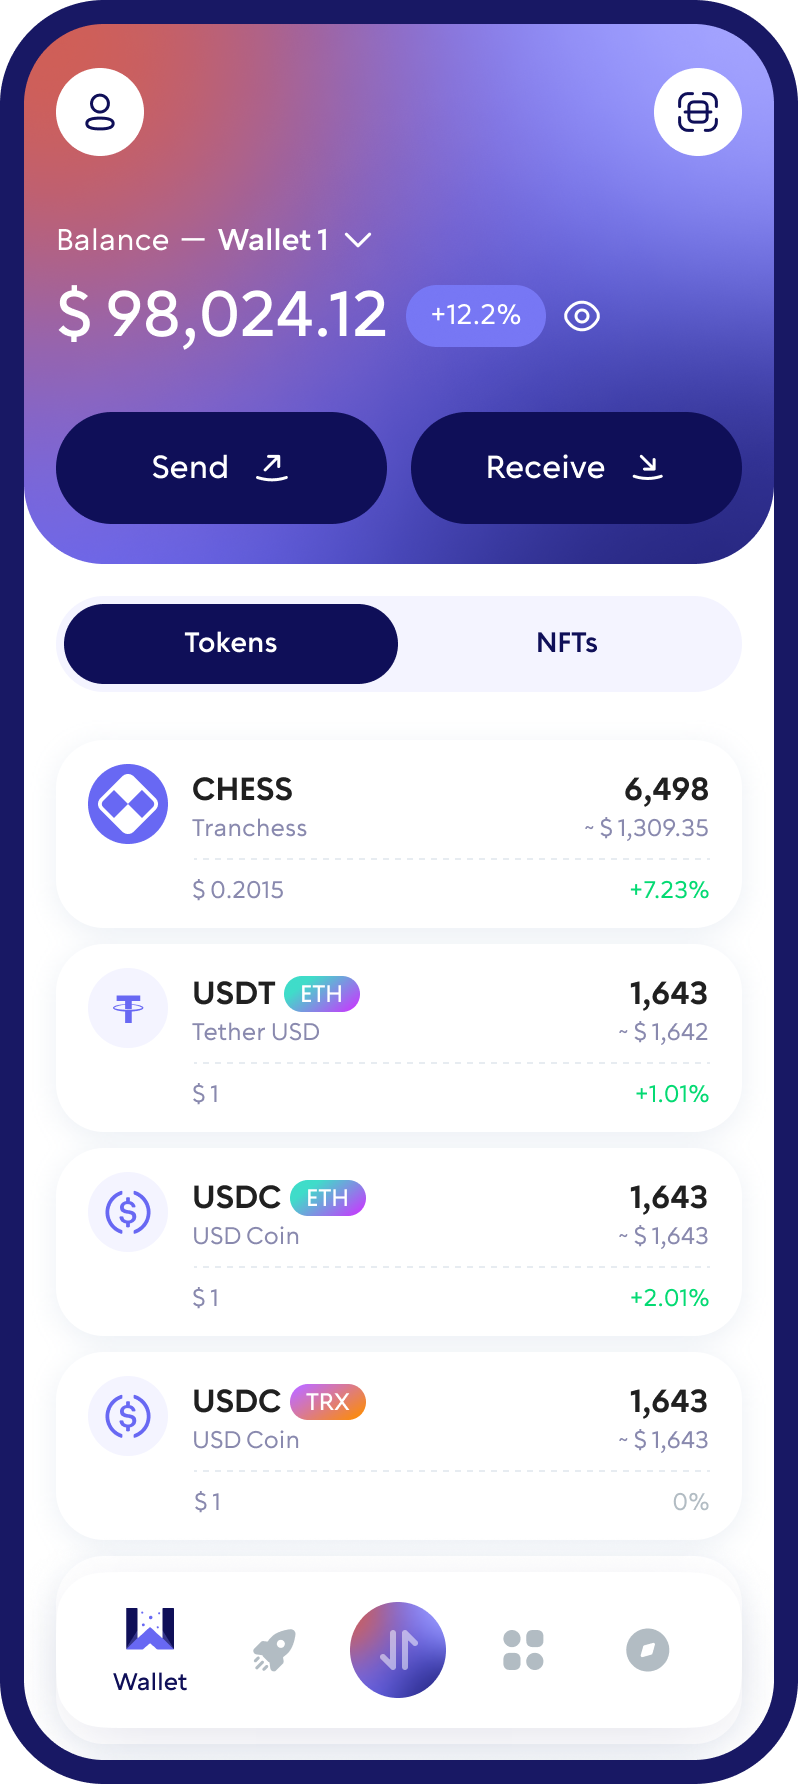 Tranchess (CHESS) Cryptocurrency Wallet Walletverse